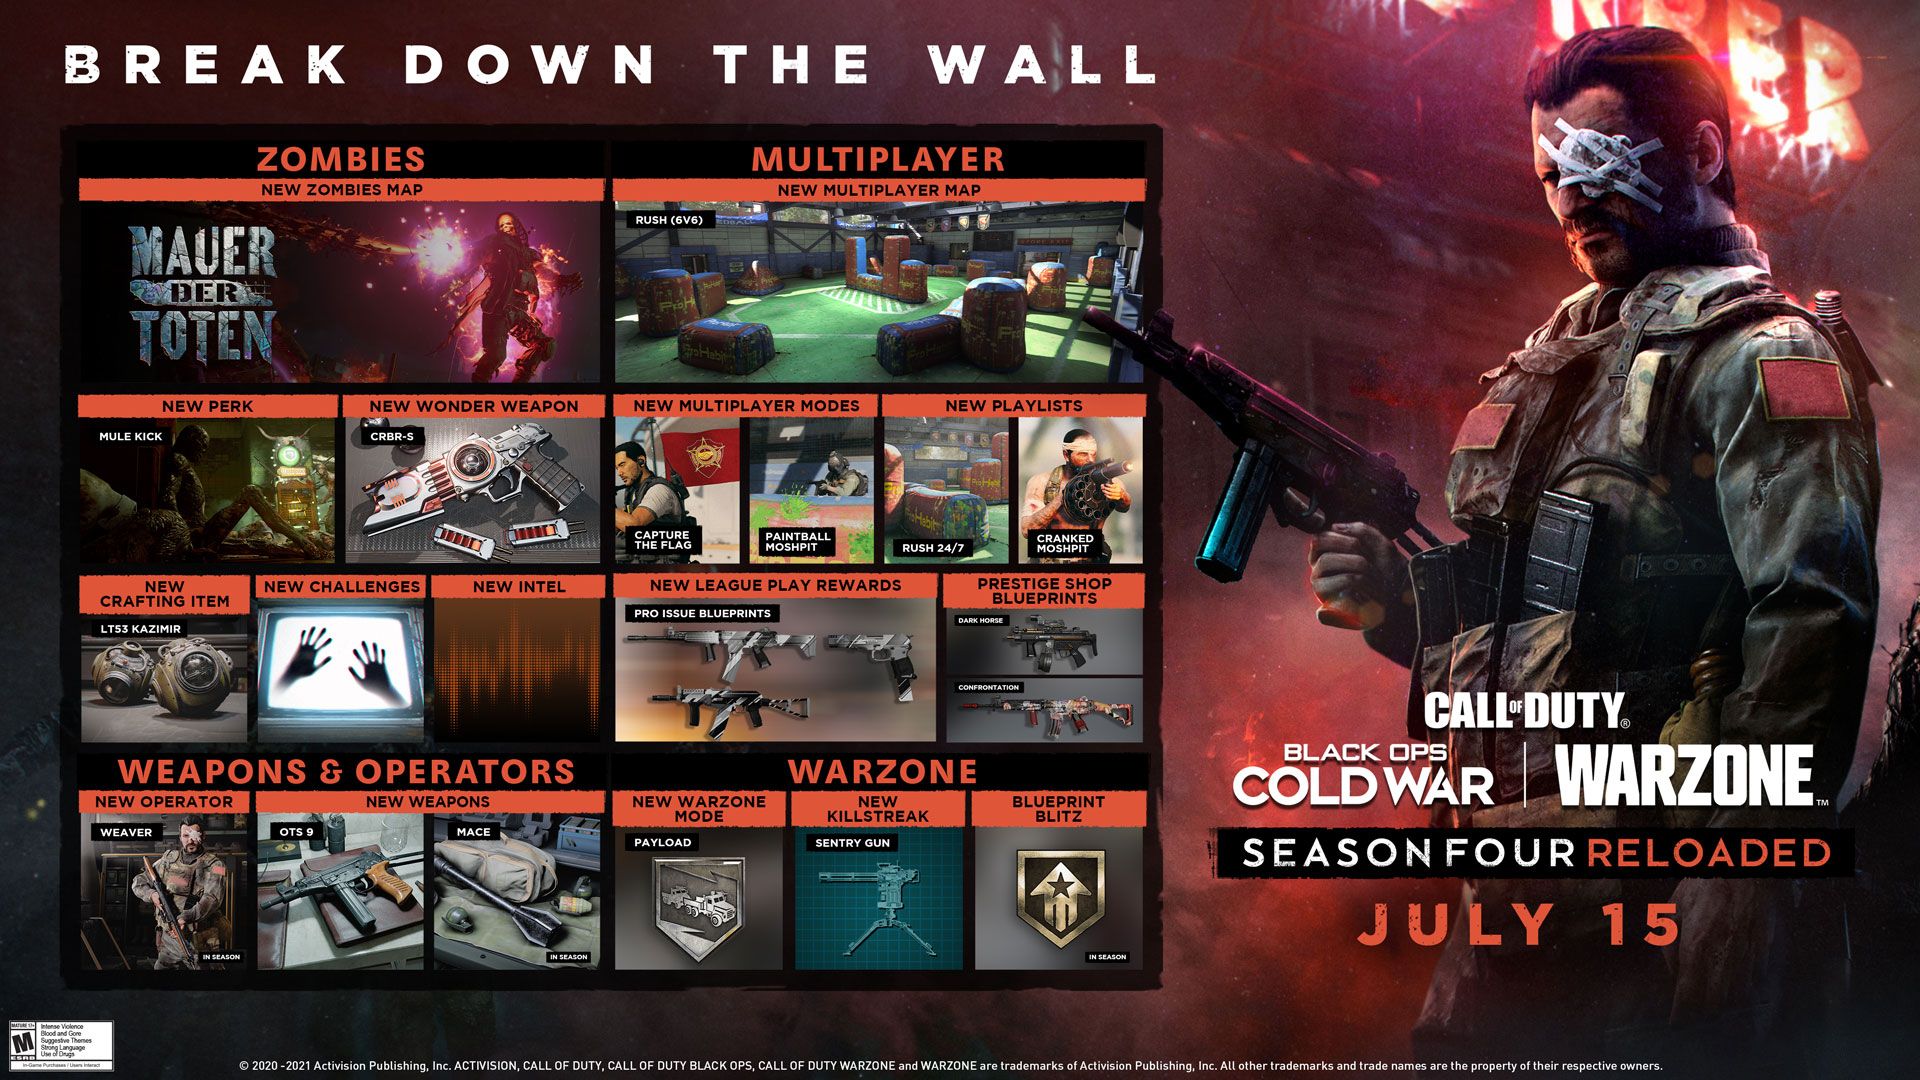 Call of Duty Black Ops and Warzone Get Massive Content Update for Season 4 Launch